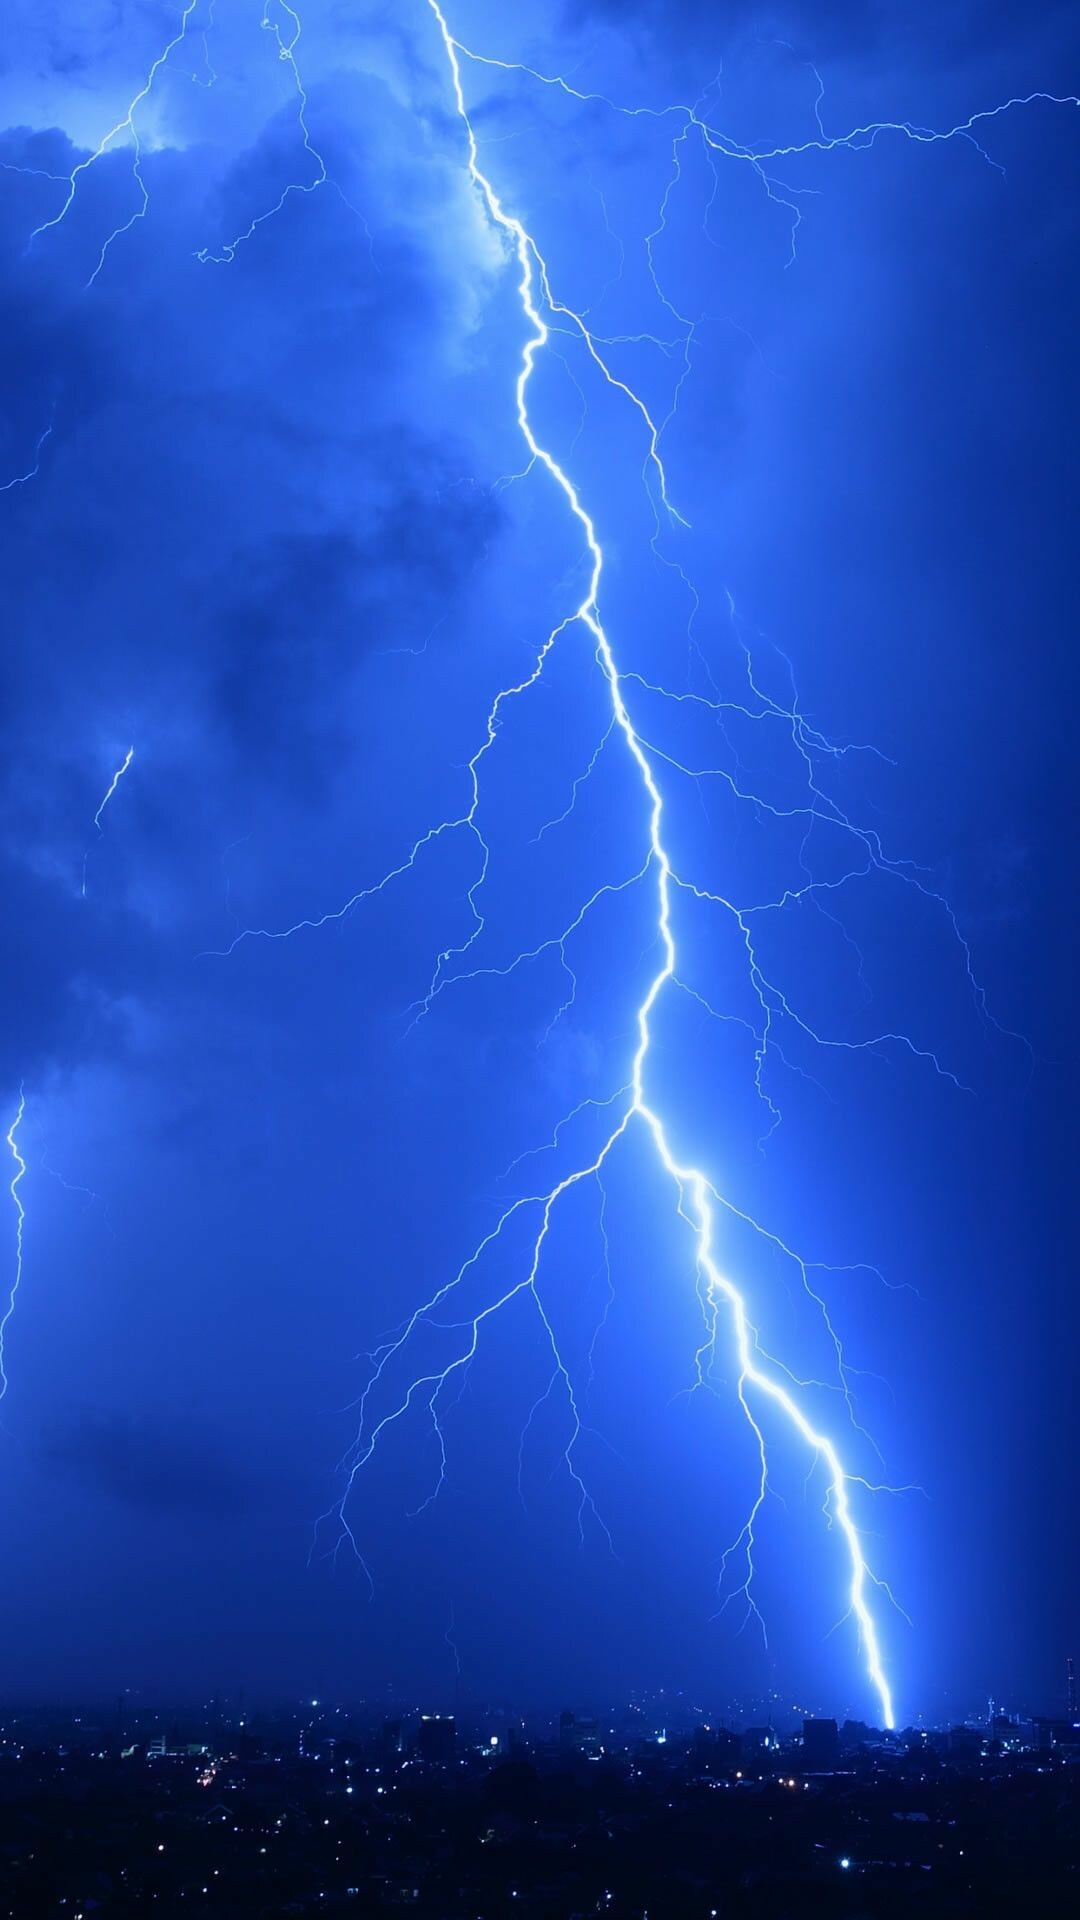 Electric storm, Vibrant blue lightning, Dark and moody, Aesthetic vibes, 1080x1920 Full HD Phone